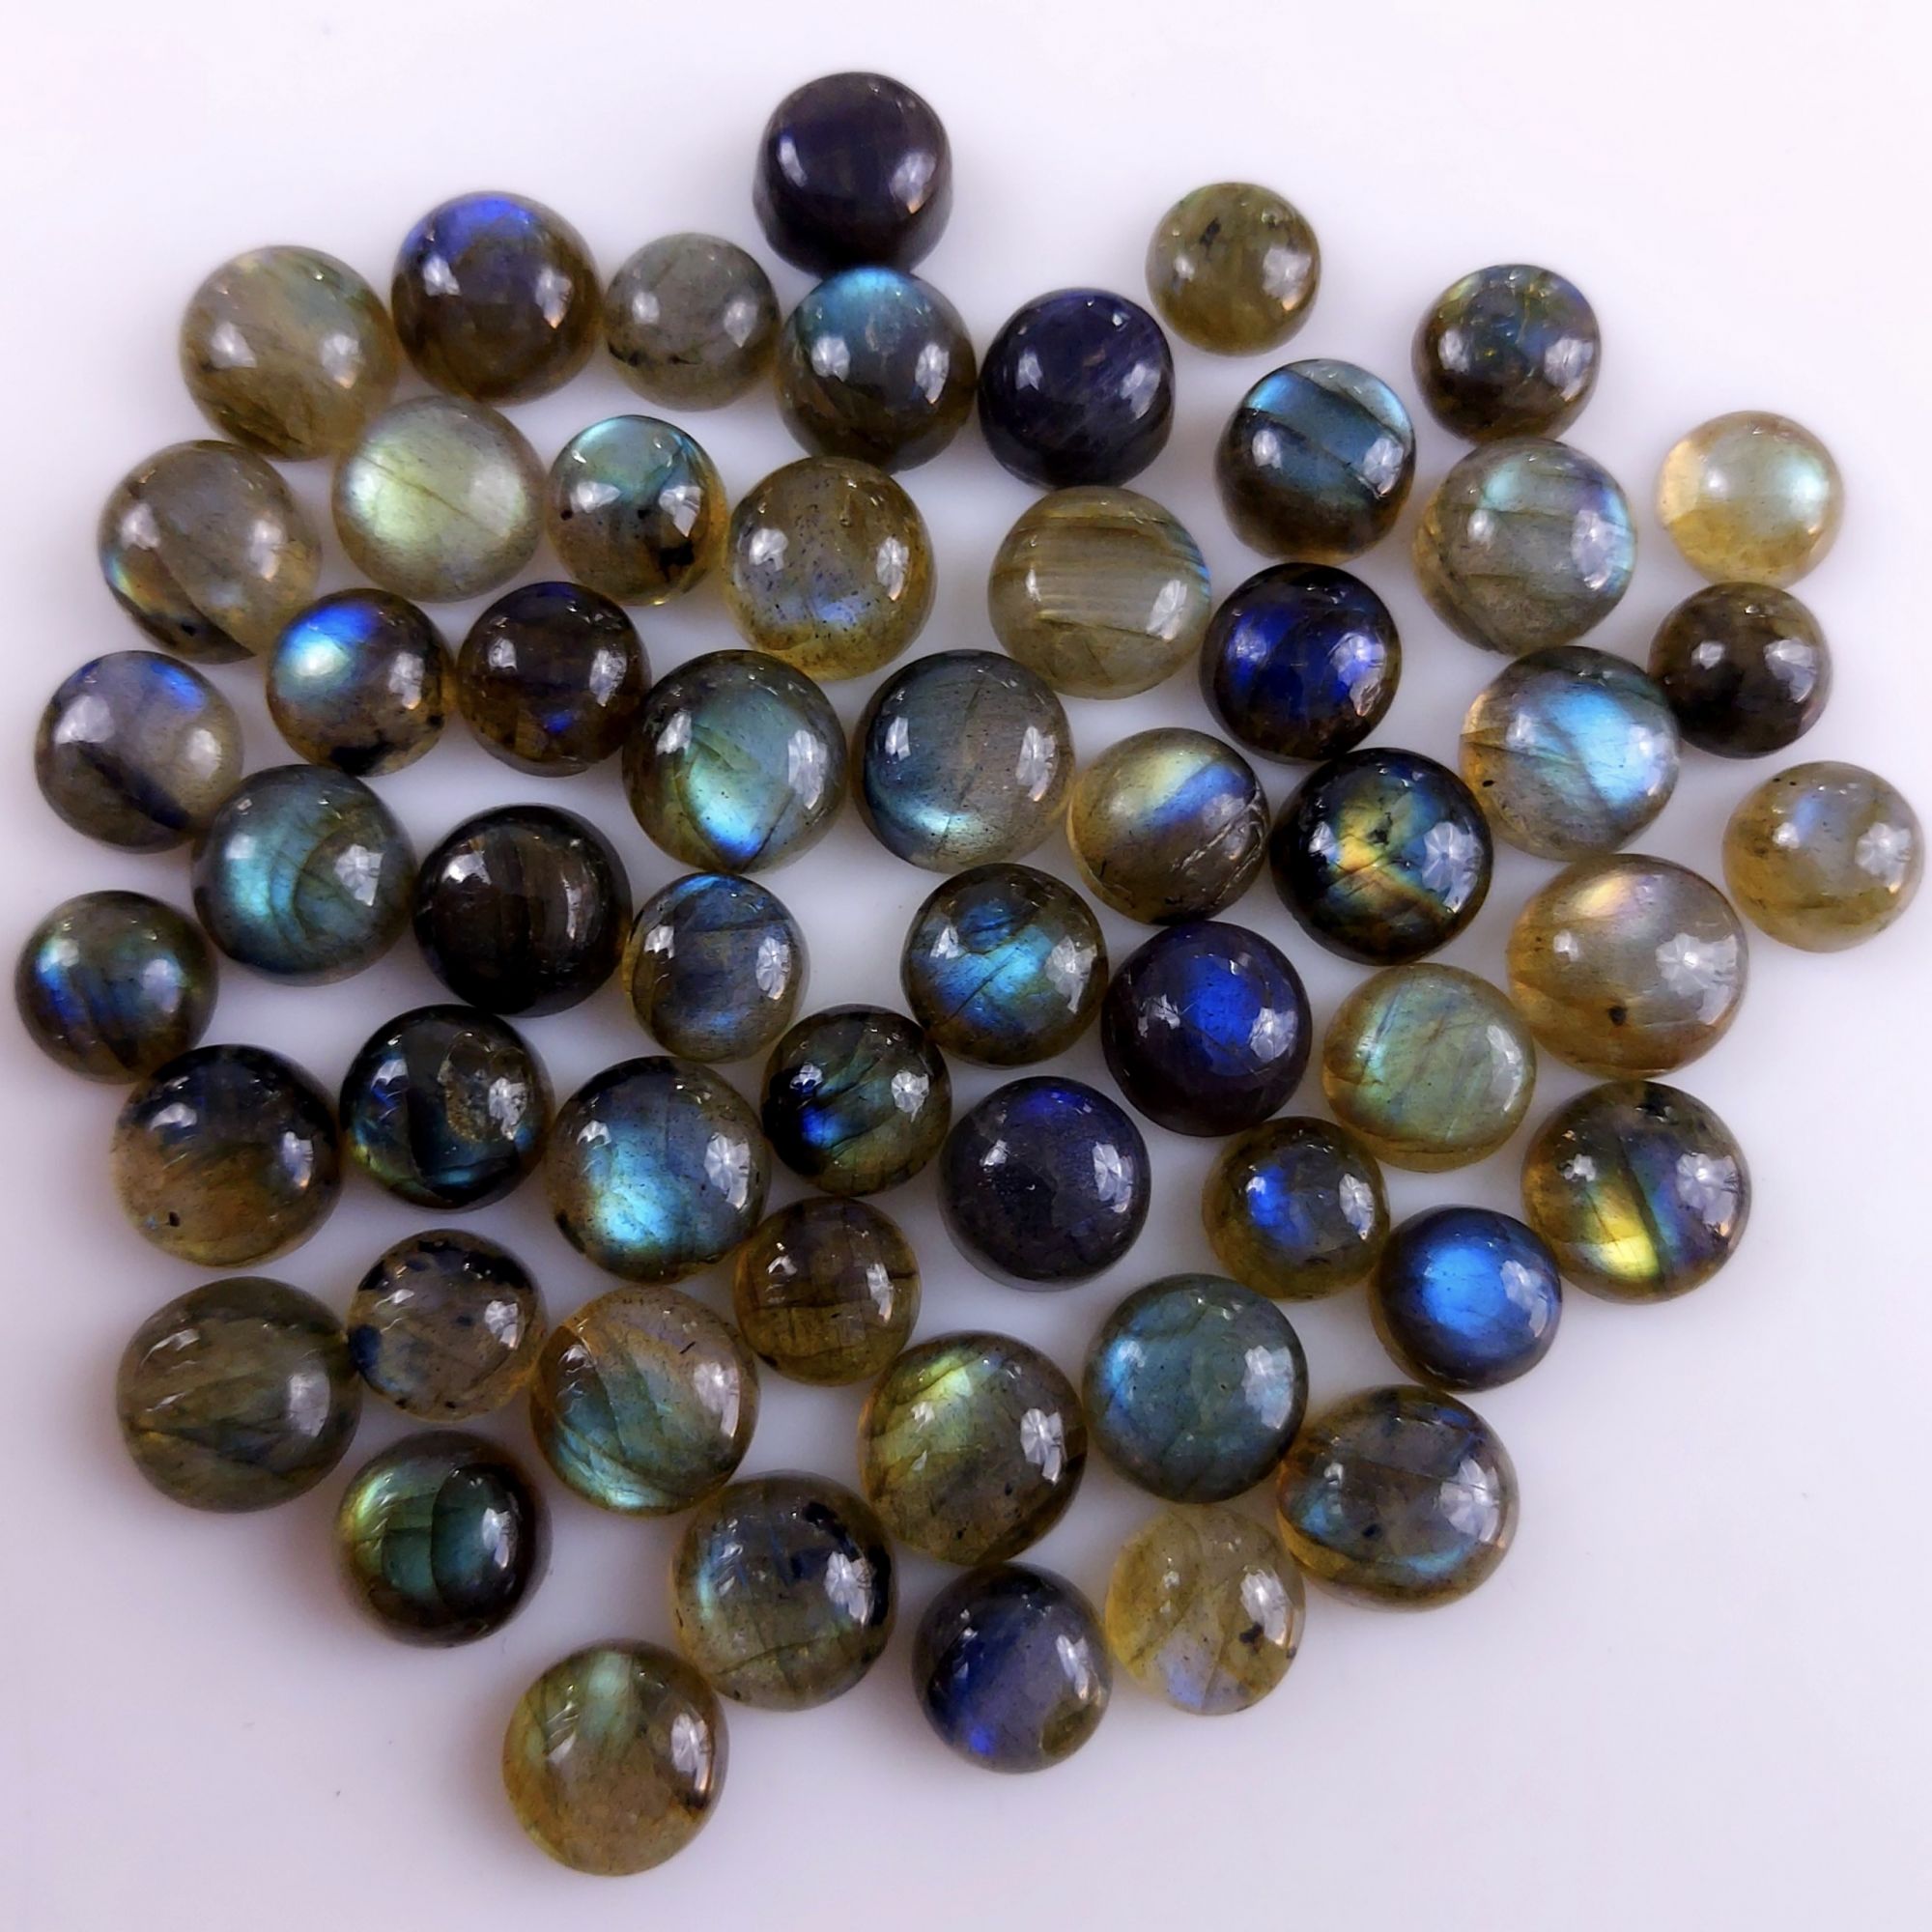 55 Pcs176Cts Natural Multifire Labradorite Loose Cabochon Round Gemstone Lot for Jewelry Making  7x7 5x5mm#1062